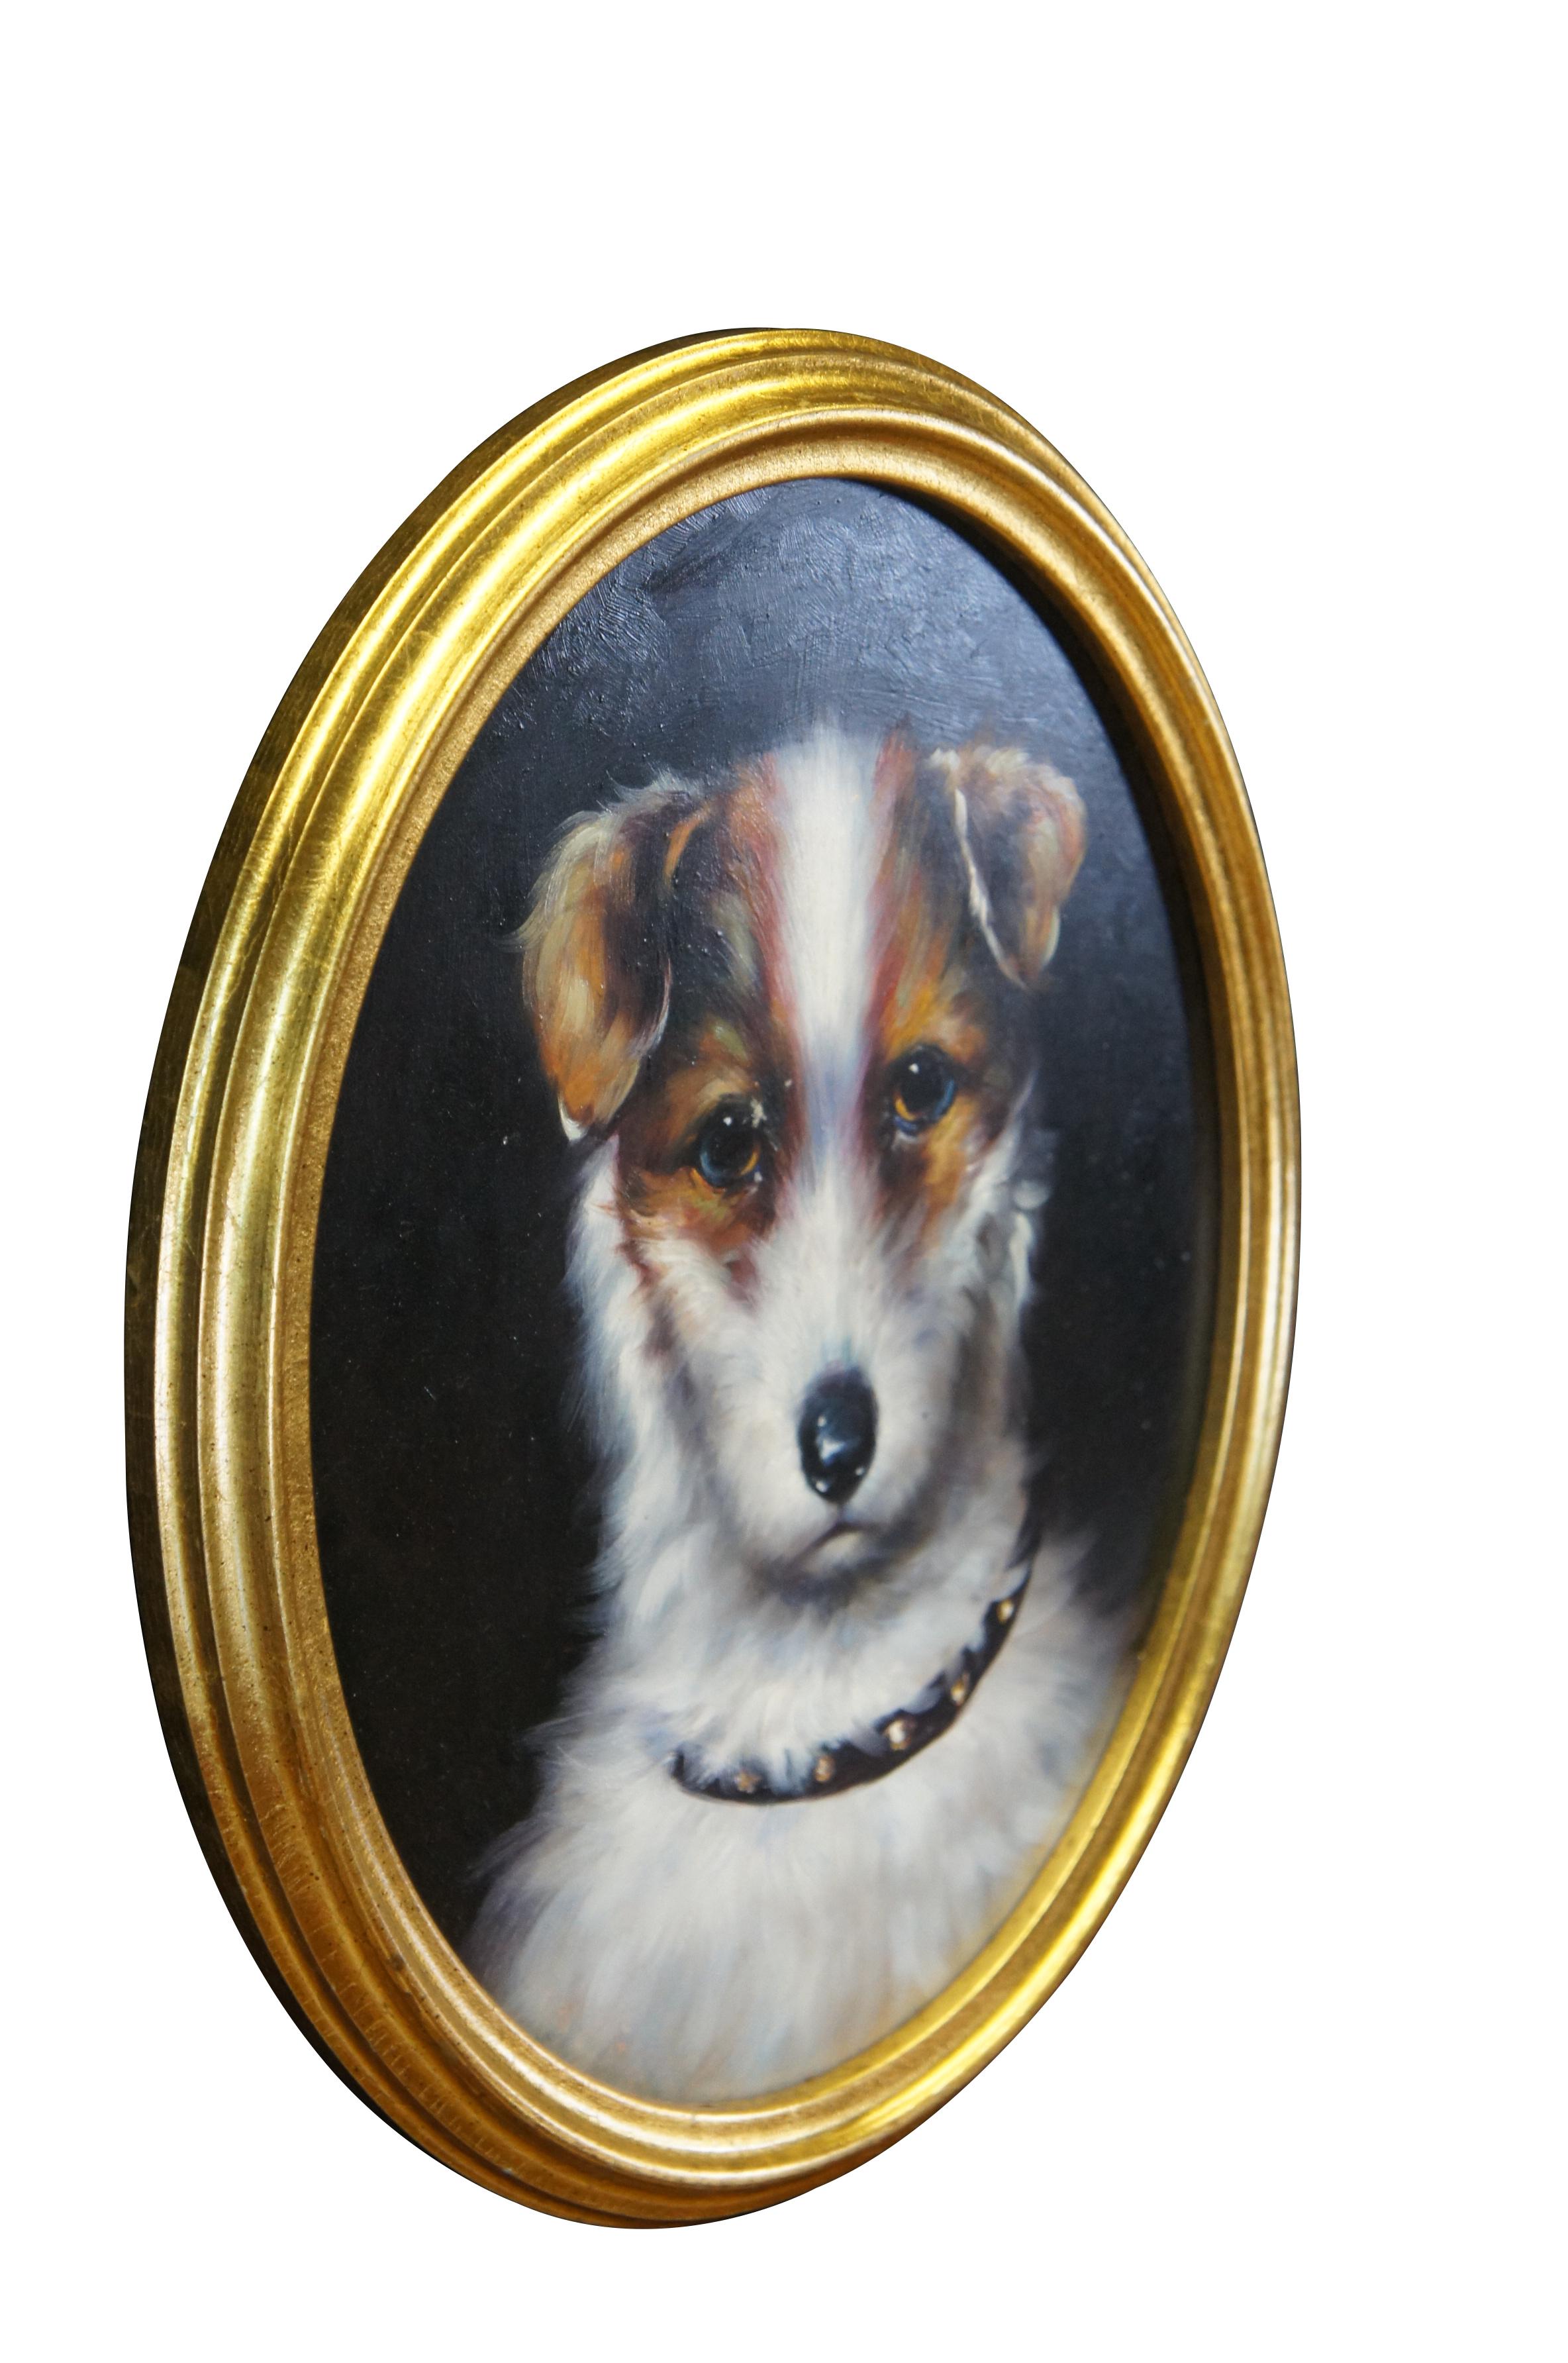 A lovely 20th century oil painting of a Terrier with black studded collar over a black background.  The painting is on an oval board and framed in a gold wooden frame.  

Dimensions:
16